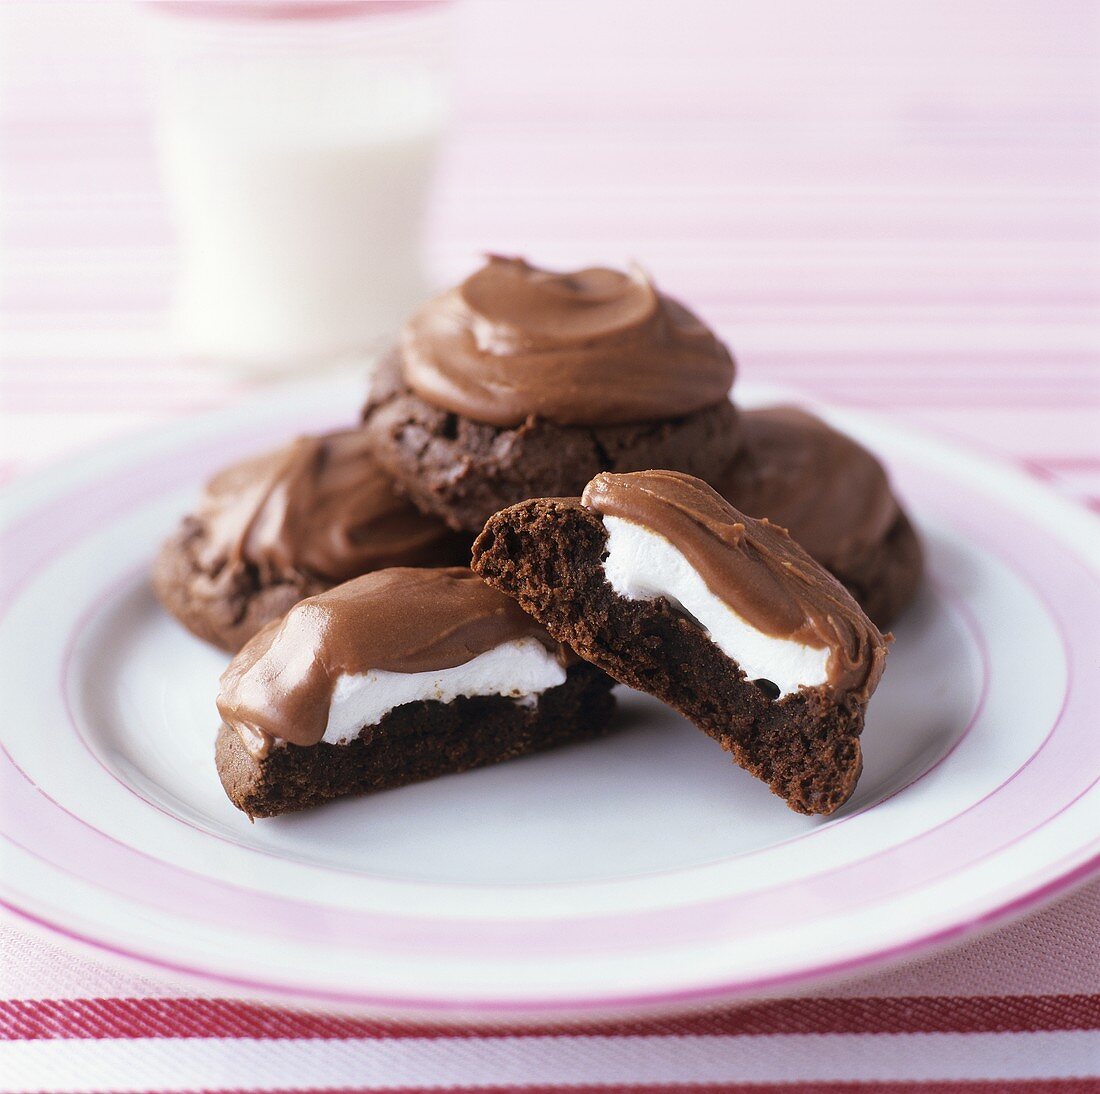 Chocolate biscuits with cream filling and chocolate icing